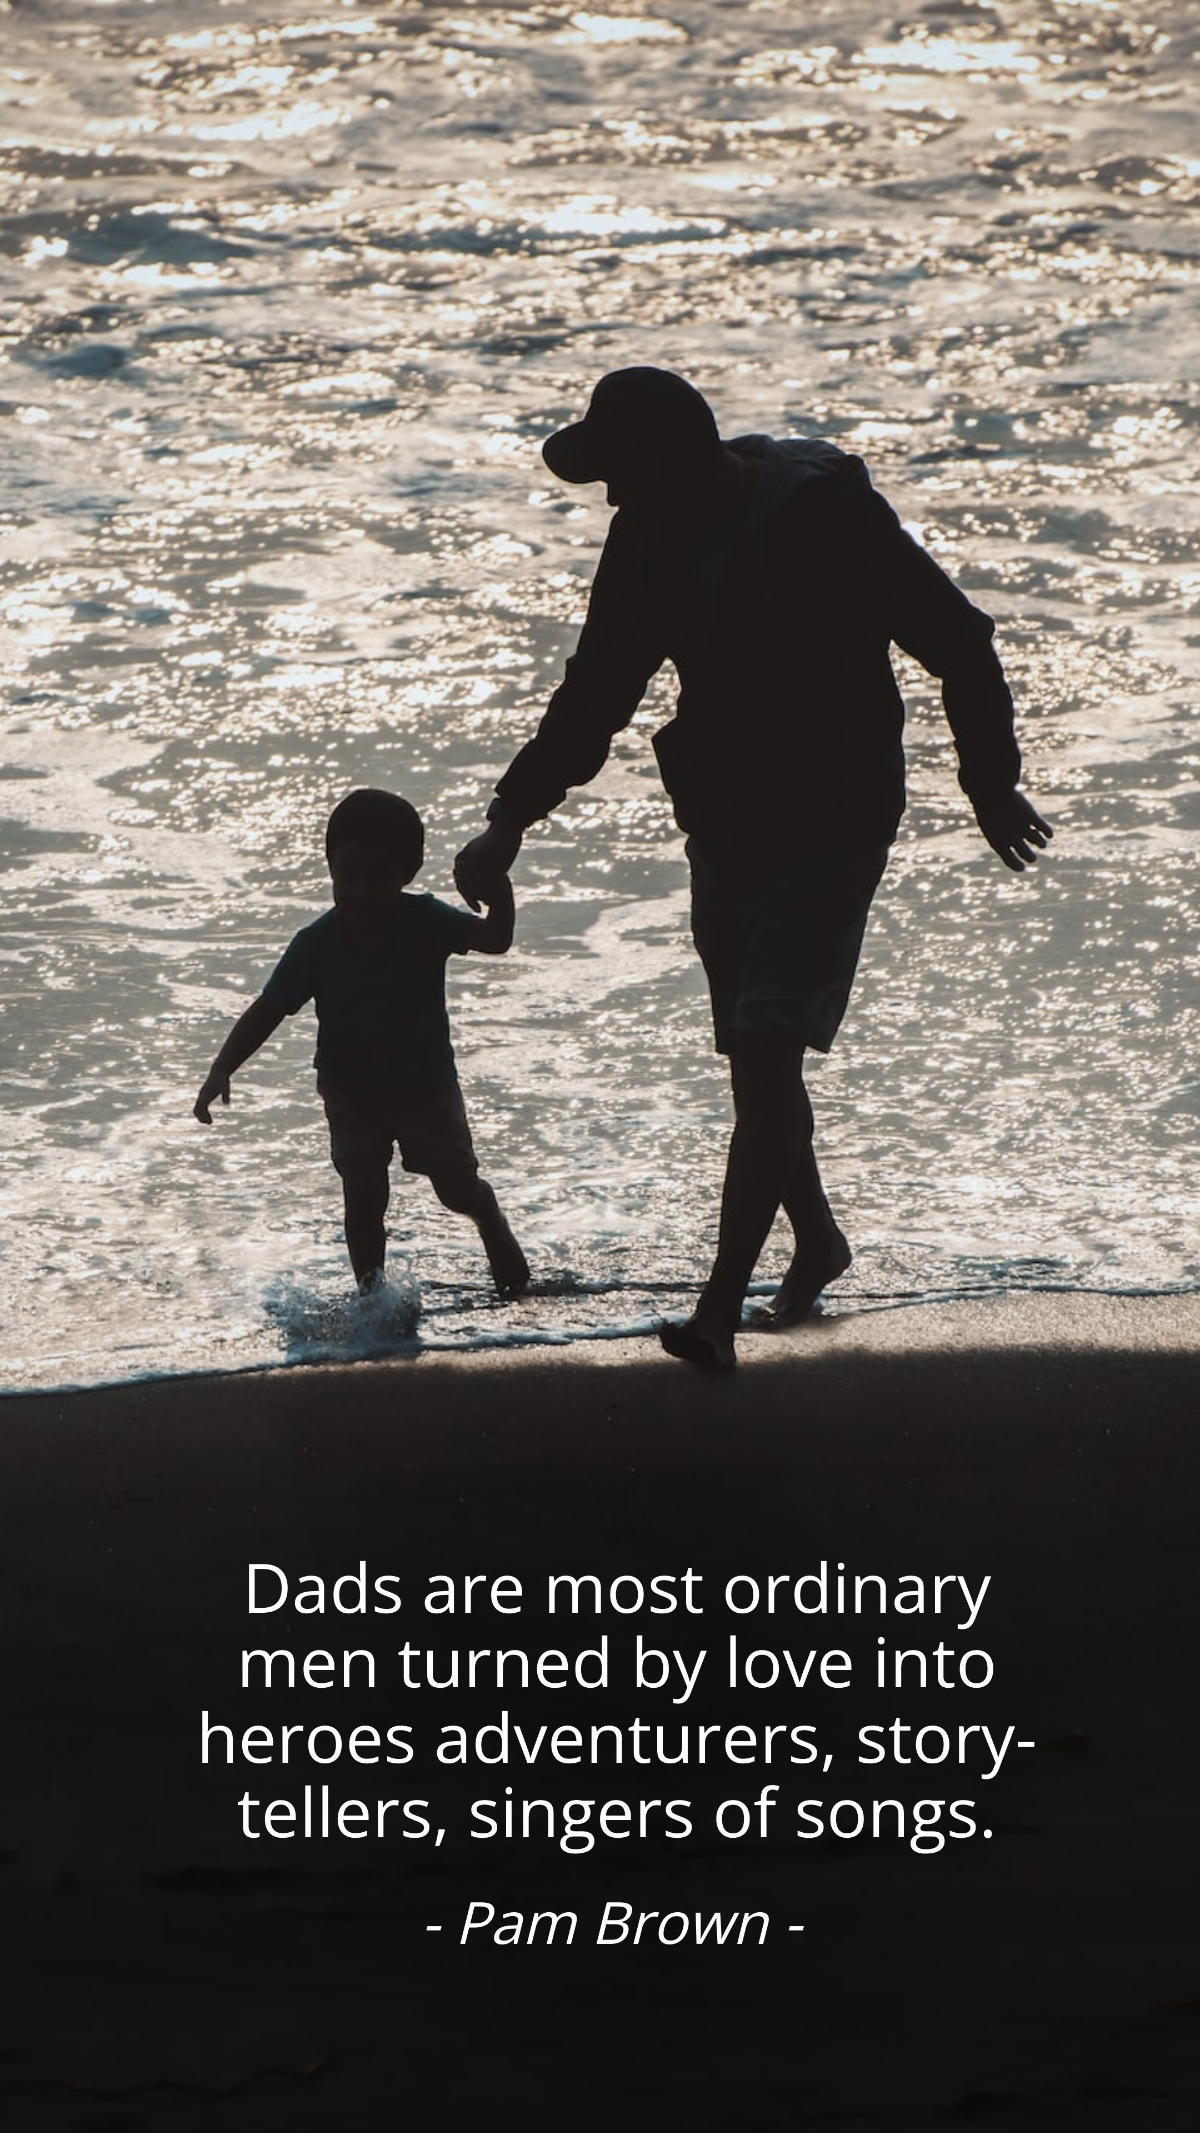 Pam Brown - Dads are most ordinary men turned by love into heroes adventurers, story-tellers, singers of songs. Template